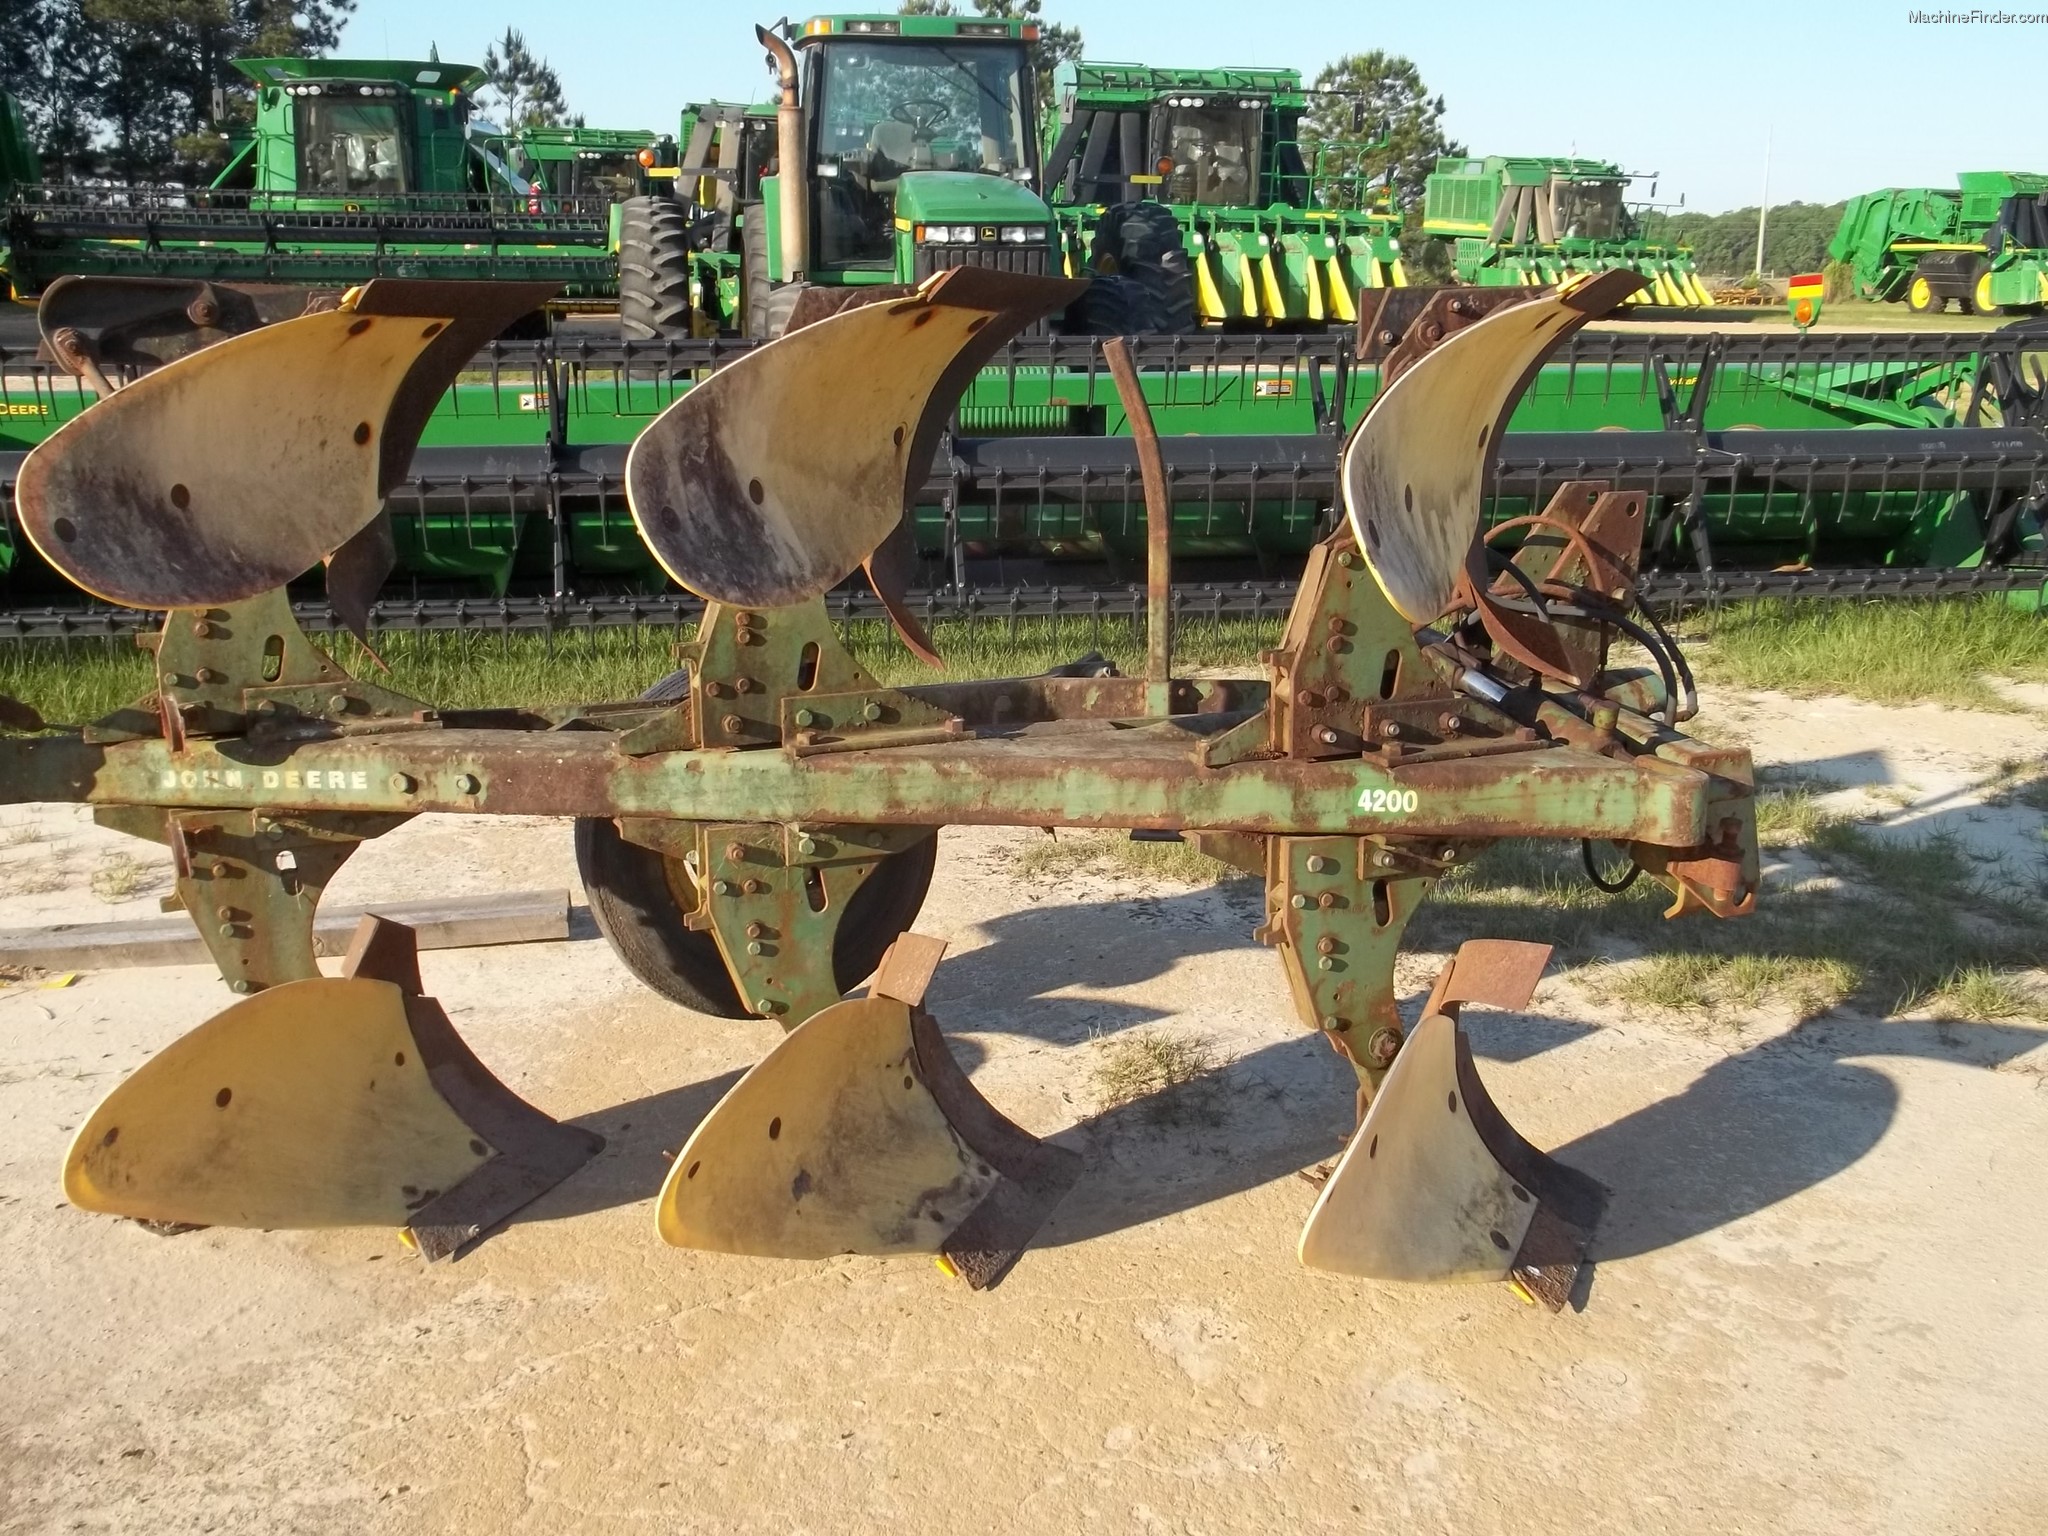 John Deere4200 Plow submited images.